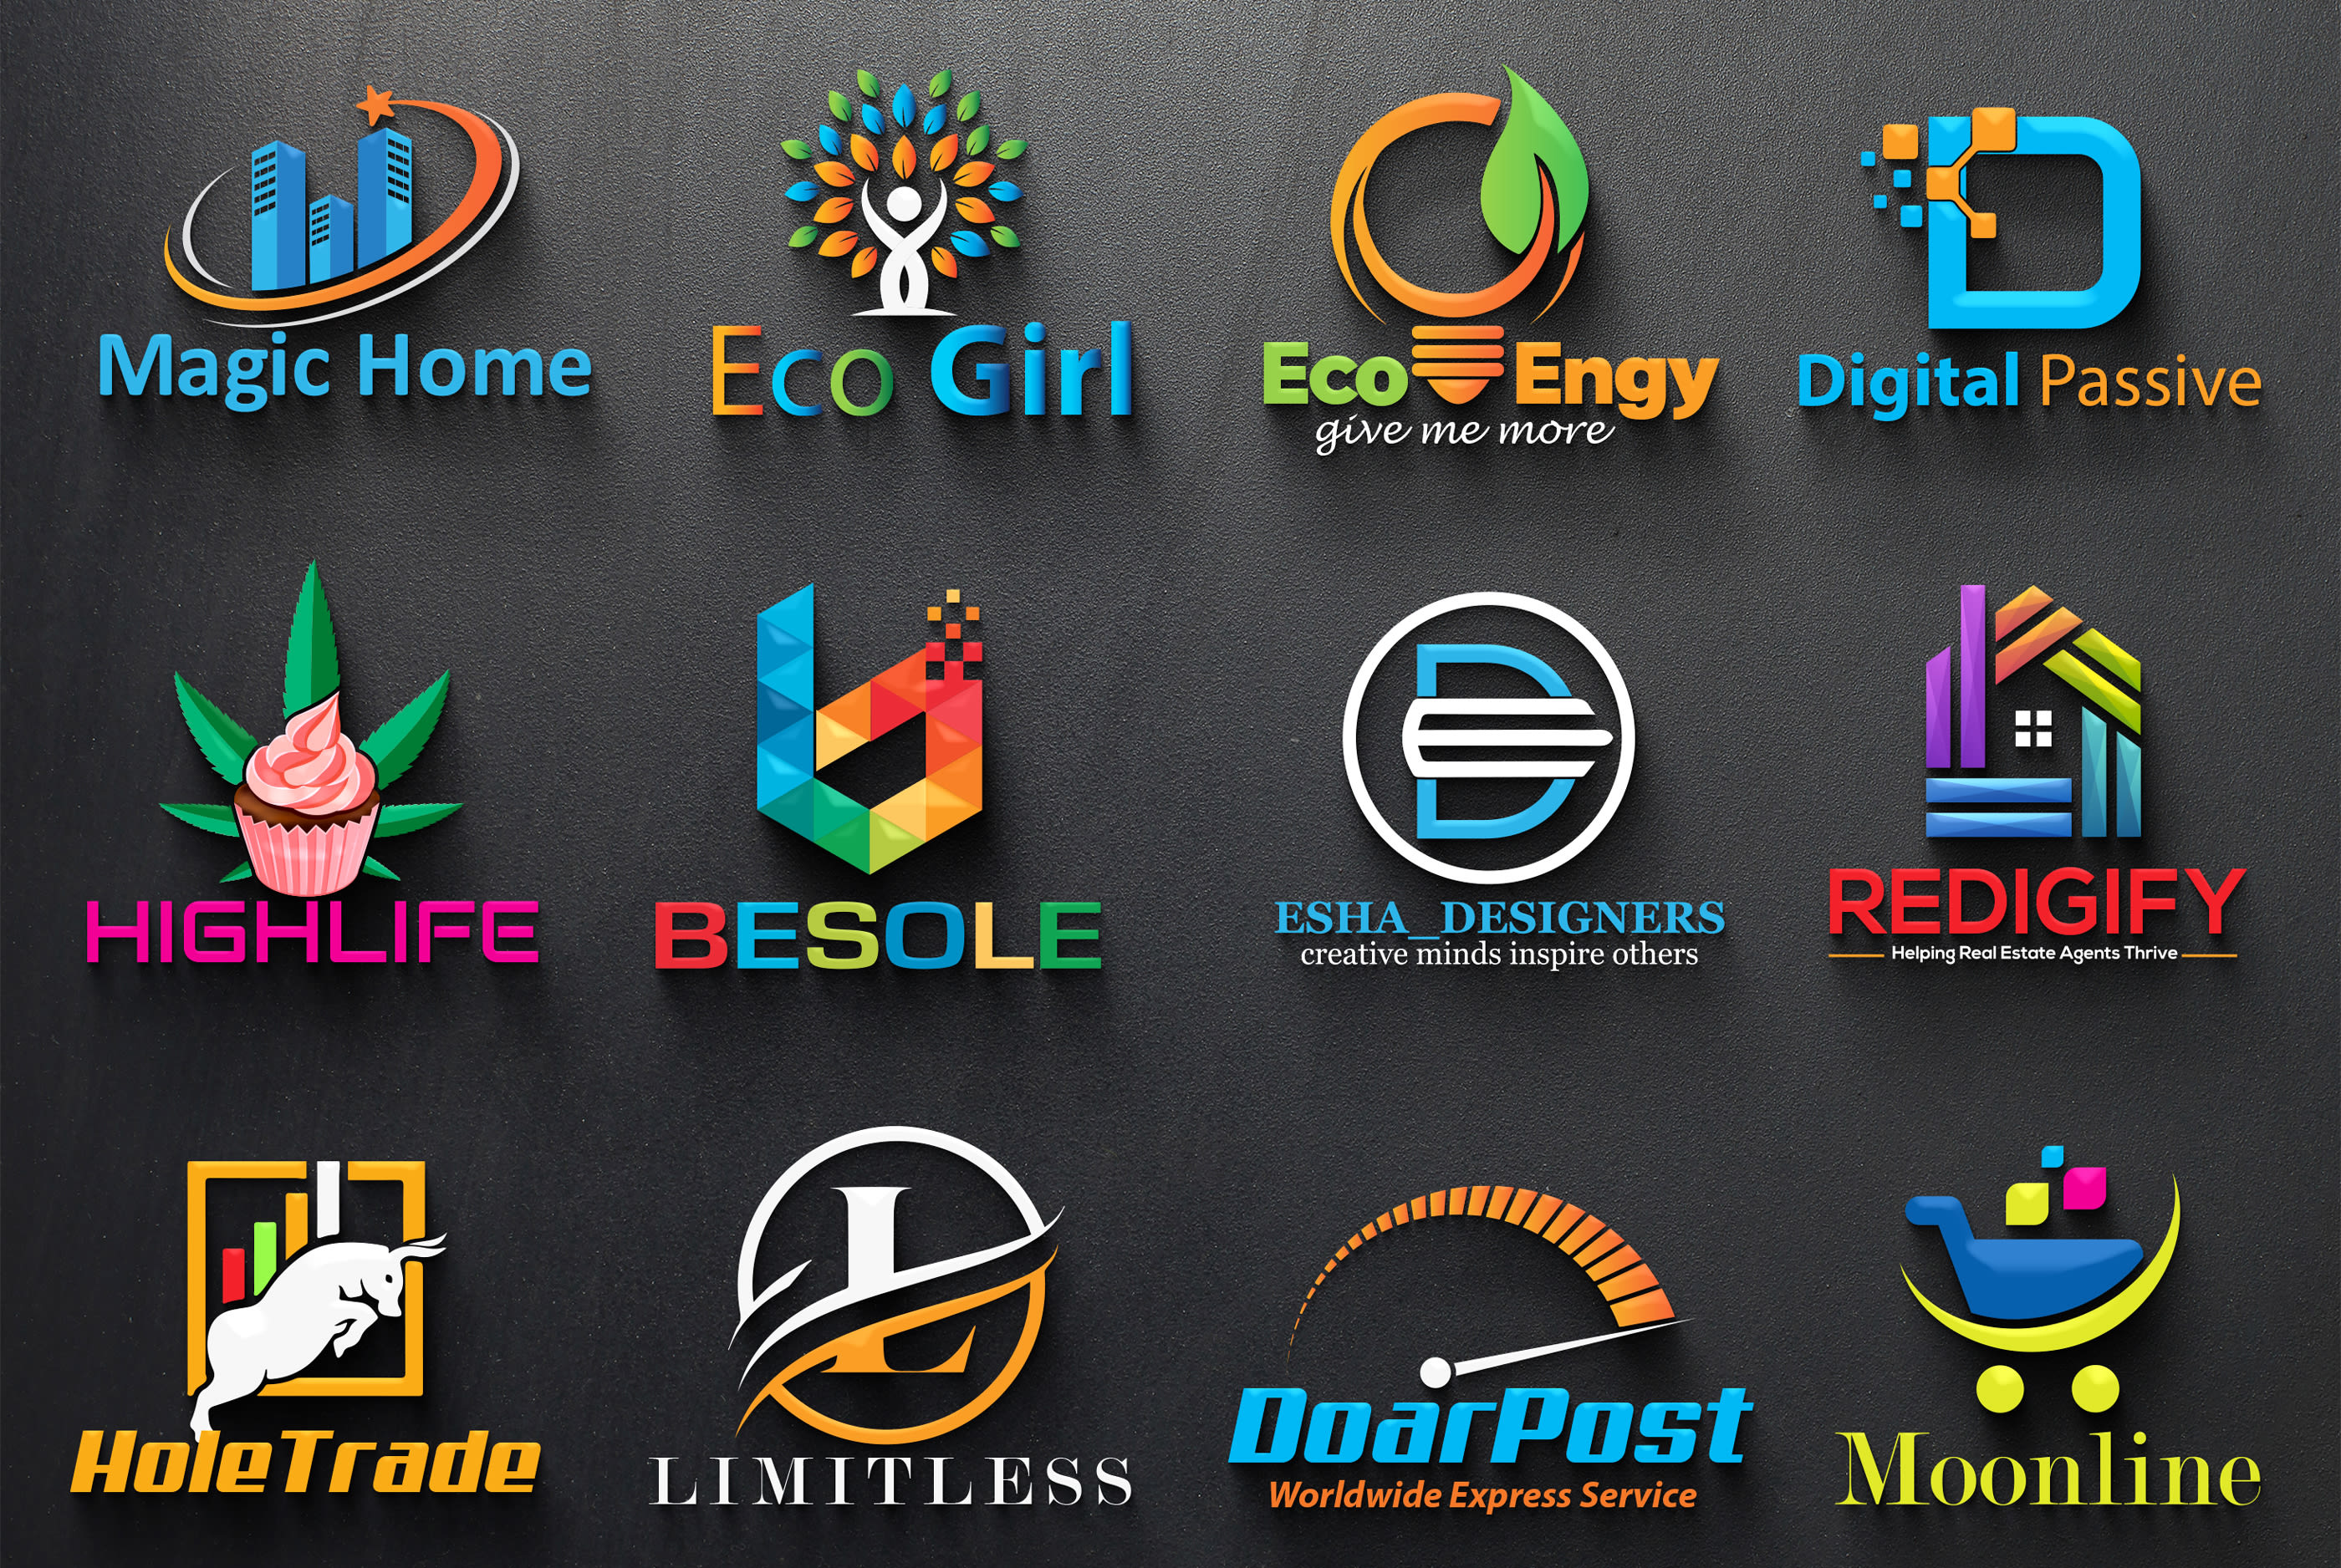 Do Unique Modern 3d Logo Design For Your Business And Company By Esha Designers Fiverr